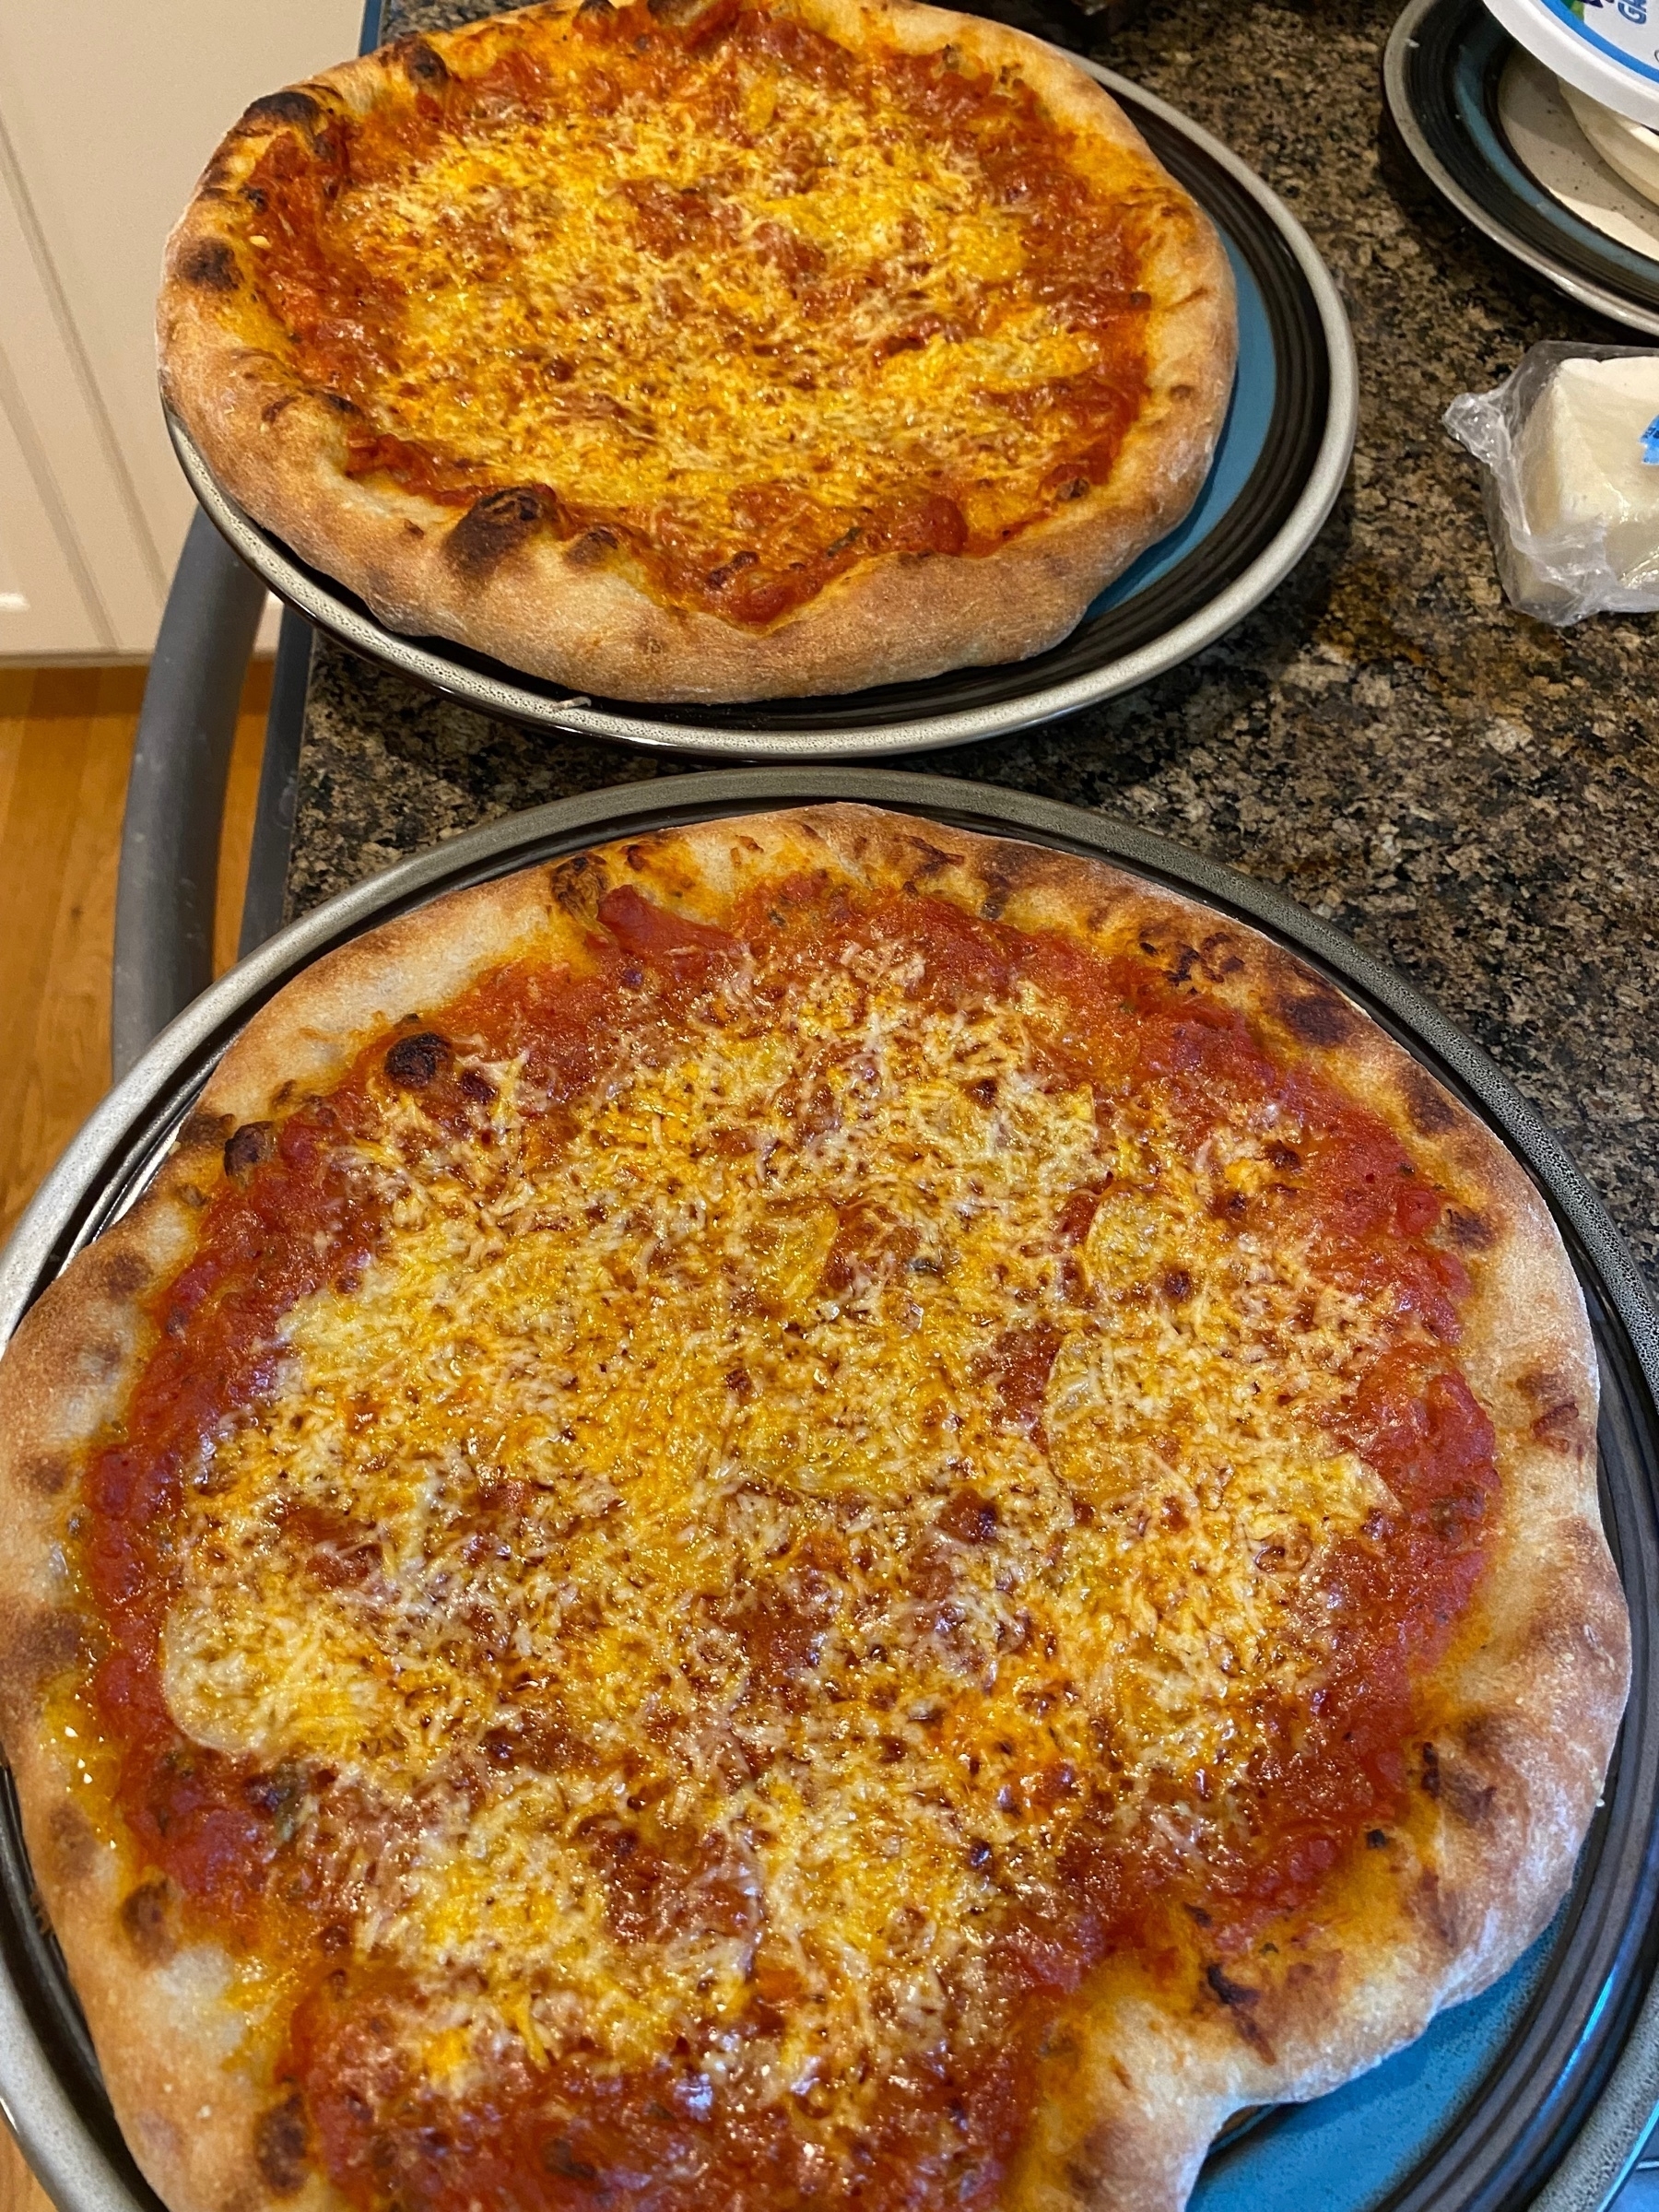 Two small pizzas on blue plates.